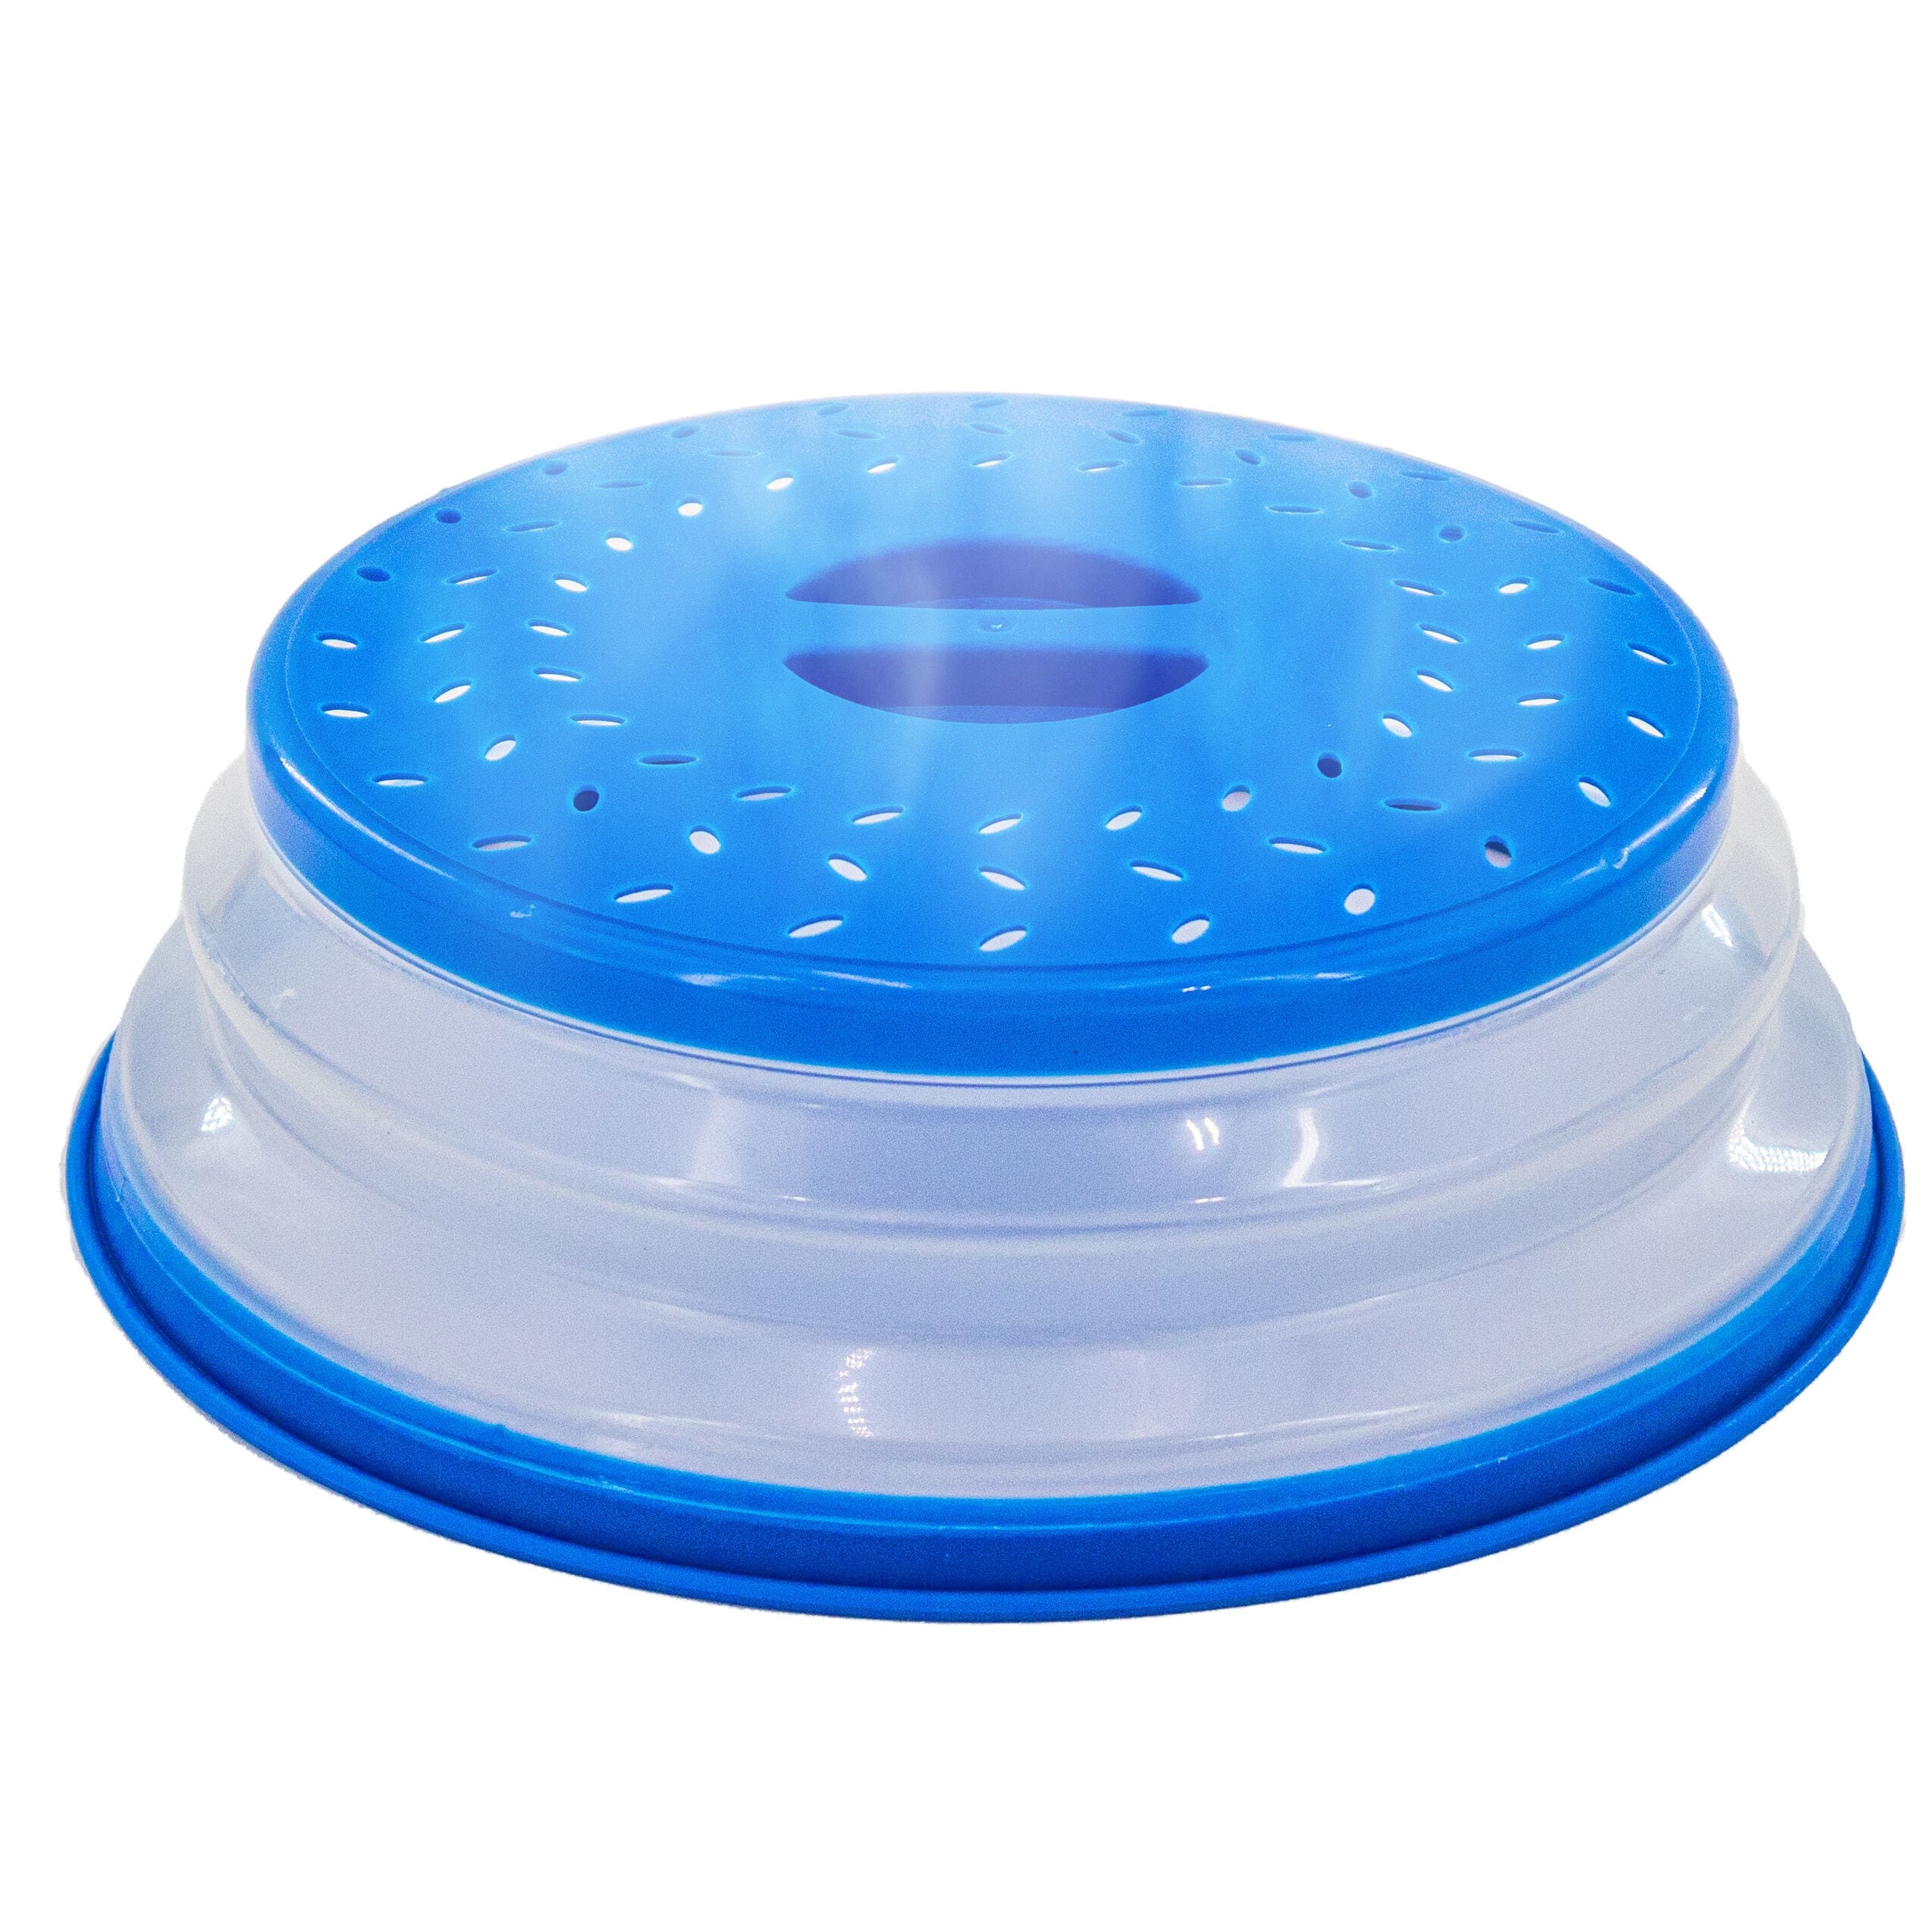 Magnetic Microwave Splatter Covers Silicone Heat Resistant Collapsible &  Versatile Food Grade Blue Splash Protection